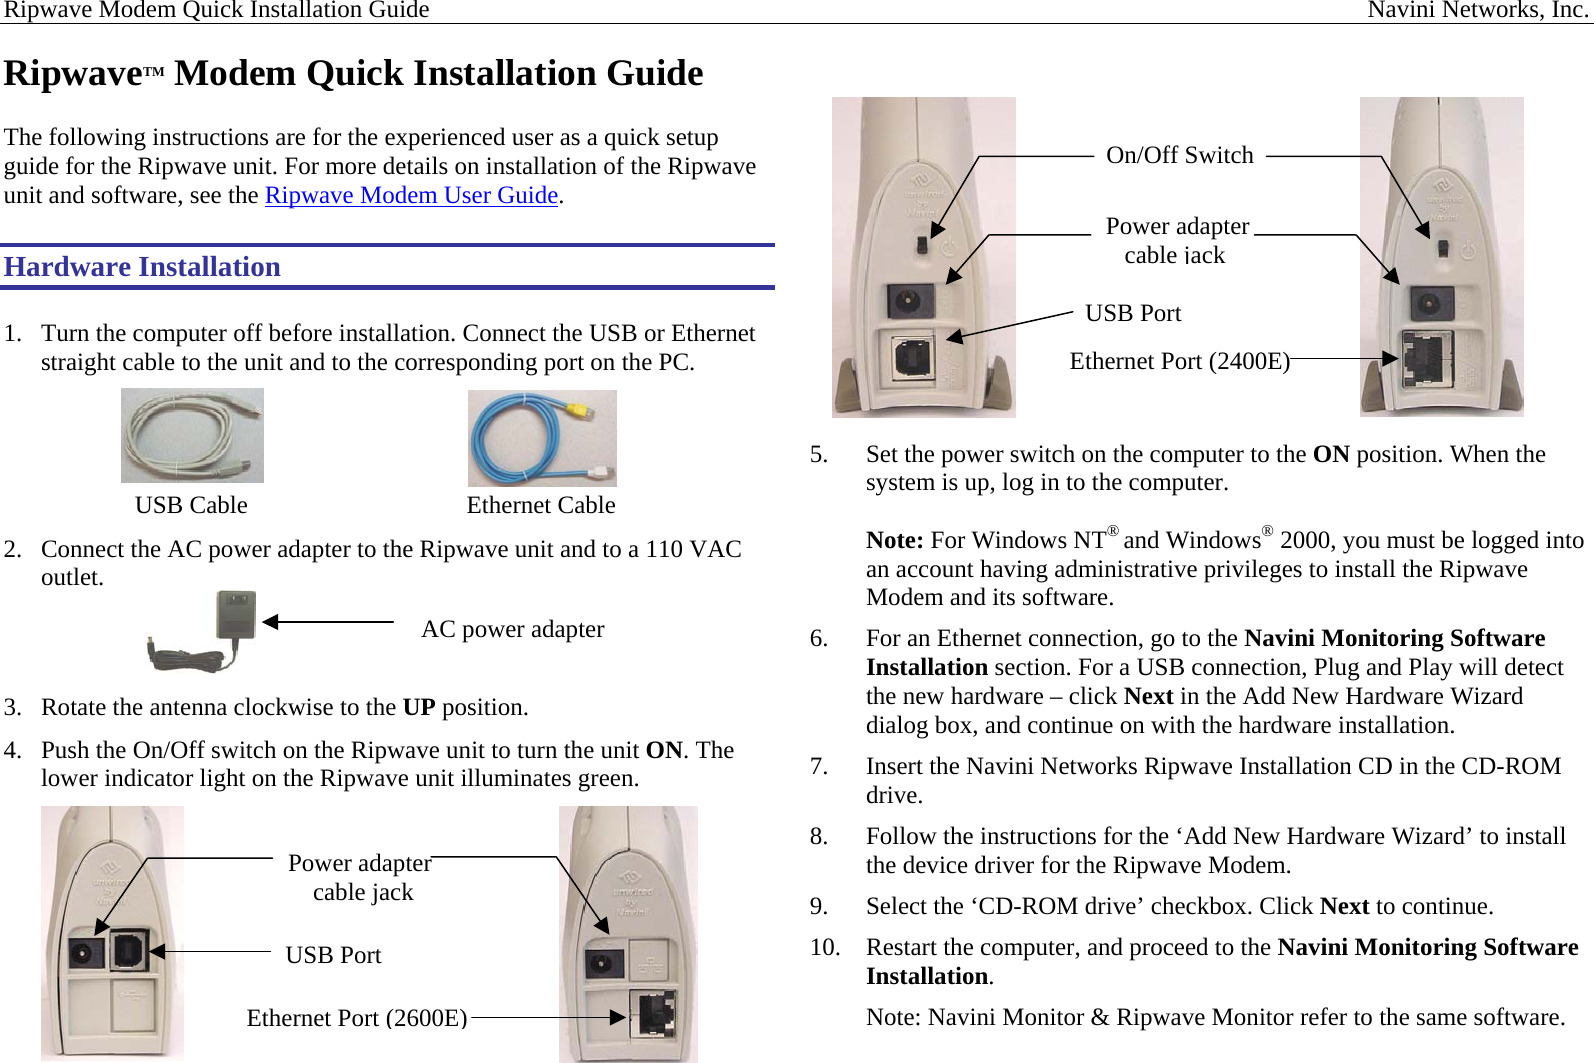 Ripwave Modem Quick Installation Guide                                                                                                                                                      Navini Networks, Inc. RipwaveTM Modem Quick Installation Guide  The following instructions are for the experienced user as a quick setup guide for the Ripwave unit. For more details on installation of the Ripwave unit and software, see the Ripwave Modem User Guide.  Hardware Installation  1.  Turn the computer off before installation. Connect the USB or Ethernet straight cable to the unit and to the corresponding port on the PC.                          USB Cable                                   Ethernet Cable 2.  Connect the AC power adapter to the Ripwave unit and to a 110 VAC outlet.    3.  Rotate the antenna clockwise to the UP position. 4.  Push the On/Off switch on the Ripwave unit to turn the unit ON. The lower indicator light on the Ripwave unit illuminates green.                        On/Off SwitchPower adapter  cable jackUSB Port  Ethernet Port (2400E)5.  Set the power switch on the computer to the ON position. When the system is up, log in to the computer.  Note: For Windows NT® and Windows® 2000, you must be logged into an account having administrative privileges to install the Ripwave Modem and its software. AC power adapter  6.  For an Ethernet connection, go to the Navini Monitoring Software Installation section. For a USB connection, Plug and Play will detect the new hardware – click Next in the Add New Hardware Wizard dialog box, and continue on with the hardware installation.  7.  Insert the Navini Networks Ripwave Installation CD in the CD-ROM drive. 8.  Follow the instructions for the ‘Add New Hardware Wizard’ to install the device driver for the Ripwave Modem. 9.  Select the ‘CD-ROM drive’ checkbox. Click Next to continue. 10.  Restart the computer, and proceed to the Navini Monitoring Software Installation. Note: Navini Monitor &amp; Ripwave Monitor refer to the same software.     Ethernet Port (2600E) USB Port Power adapter     cable jack 